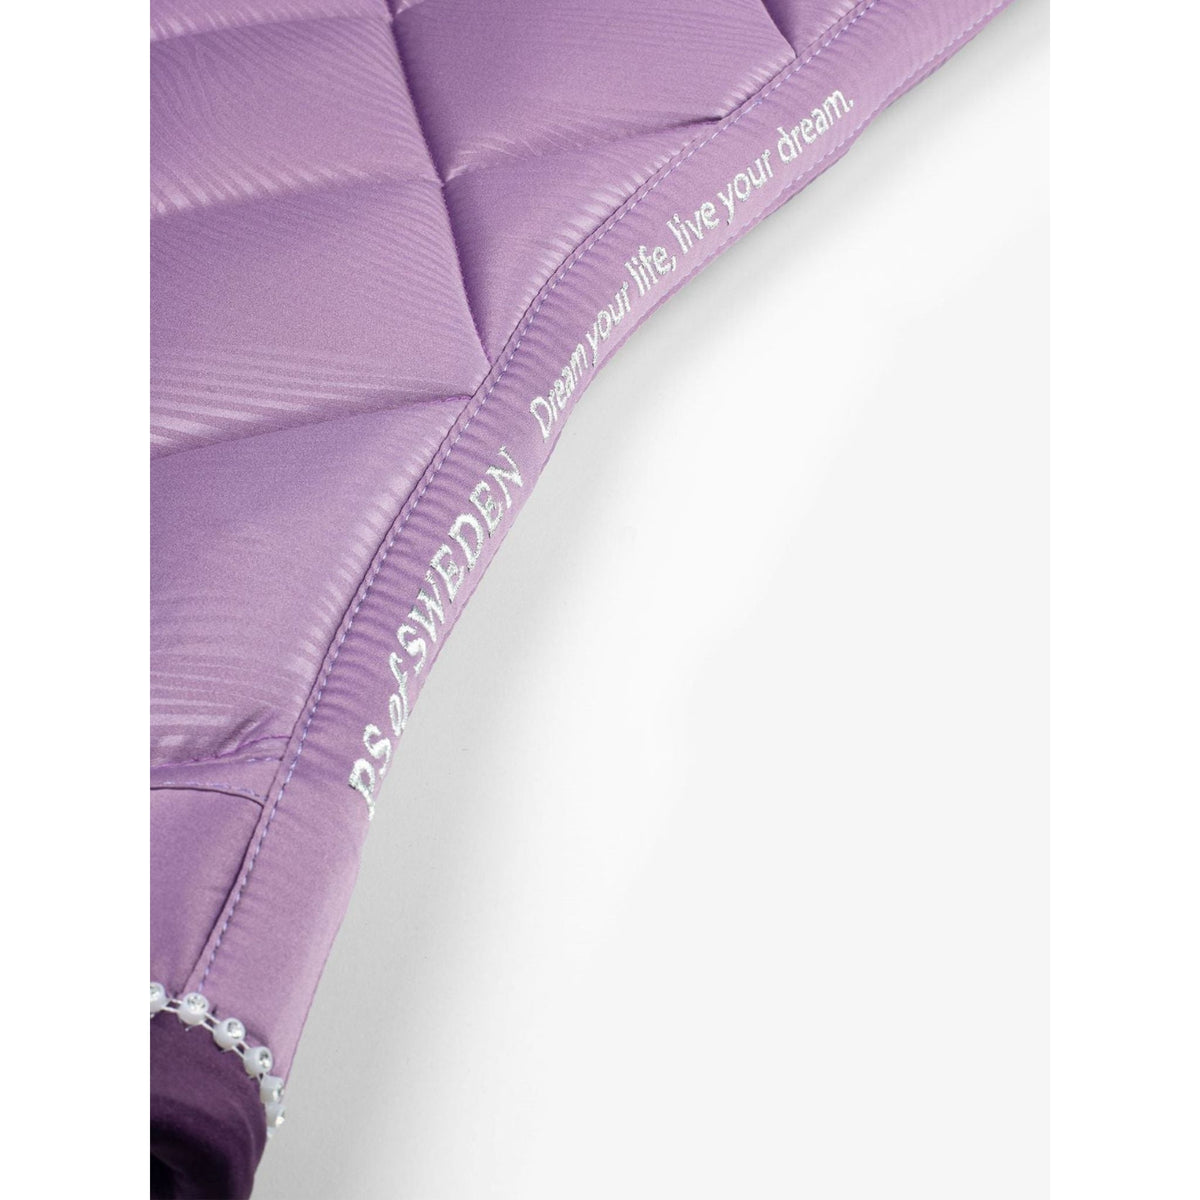 Close up of purple saddle pad with quote across top line.